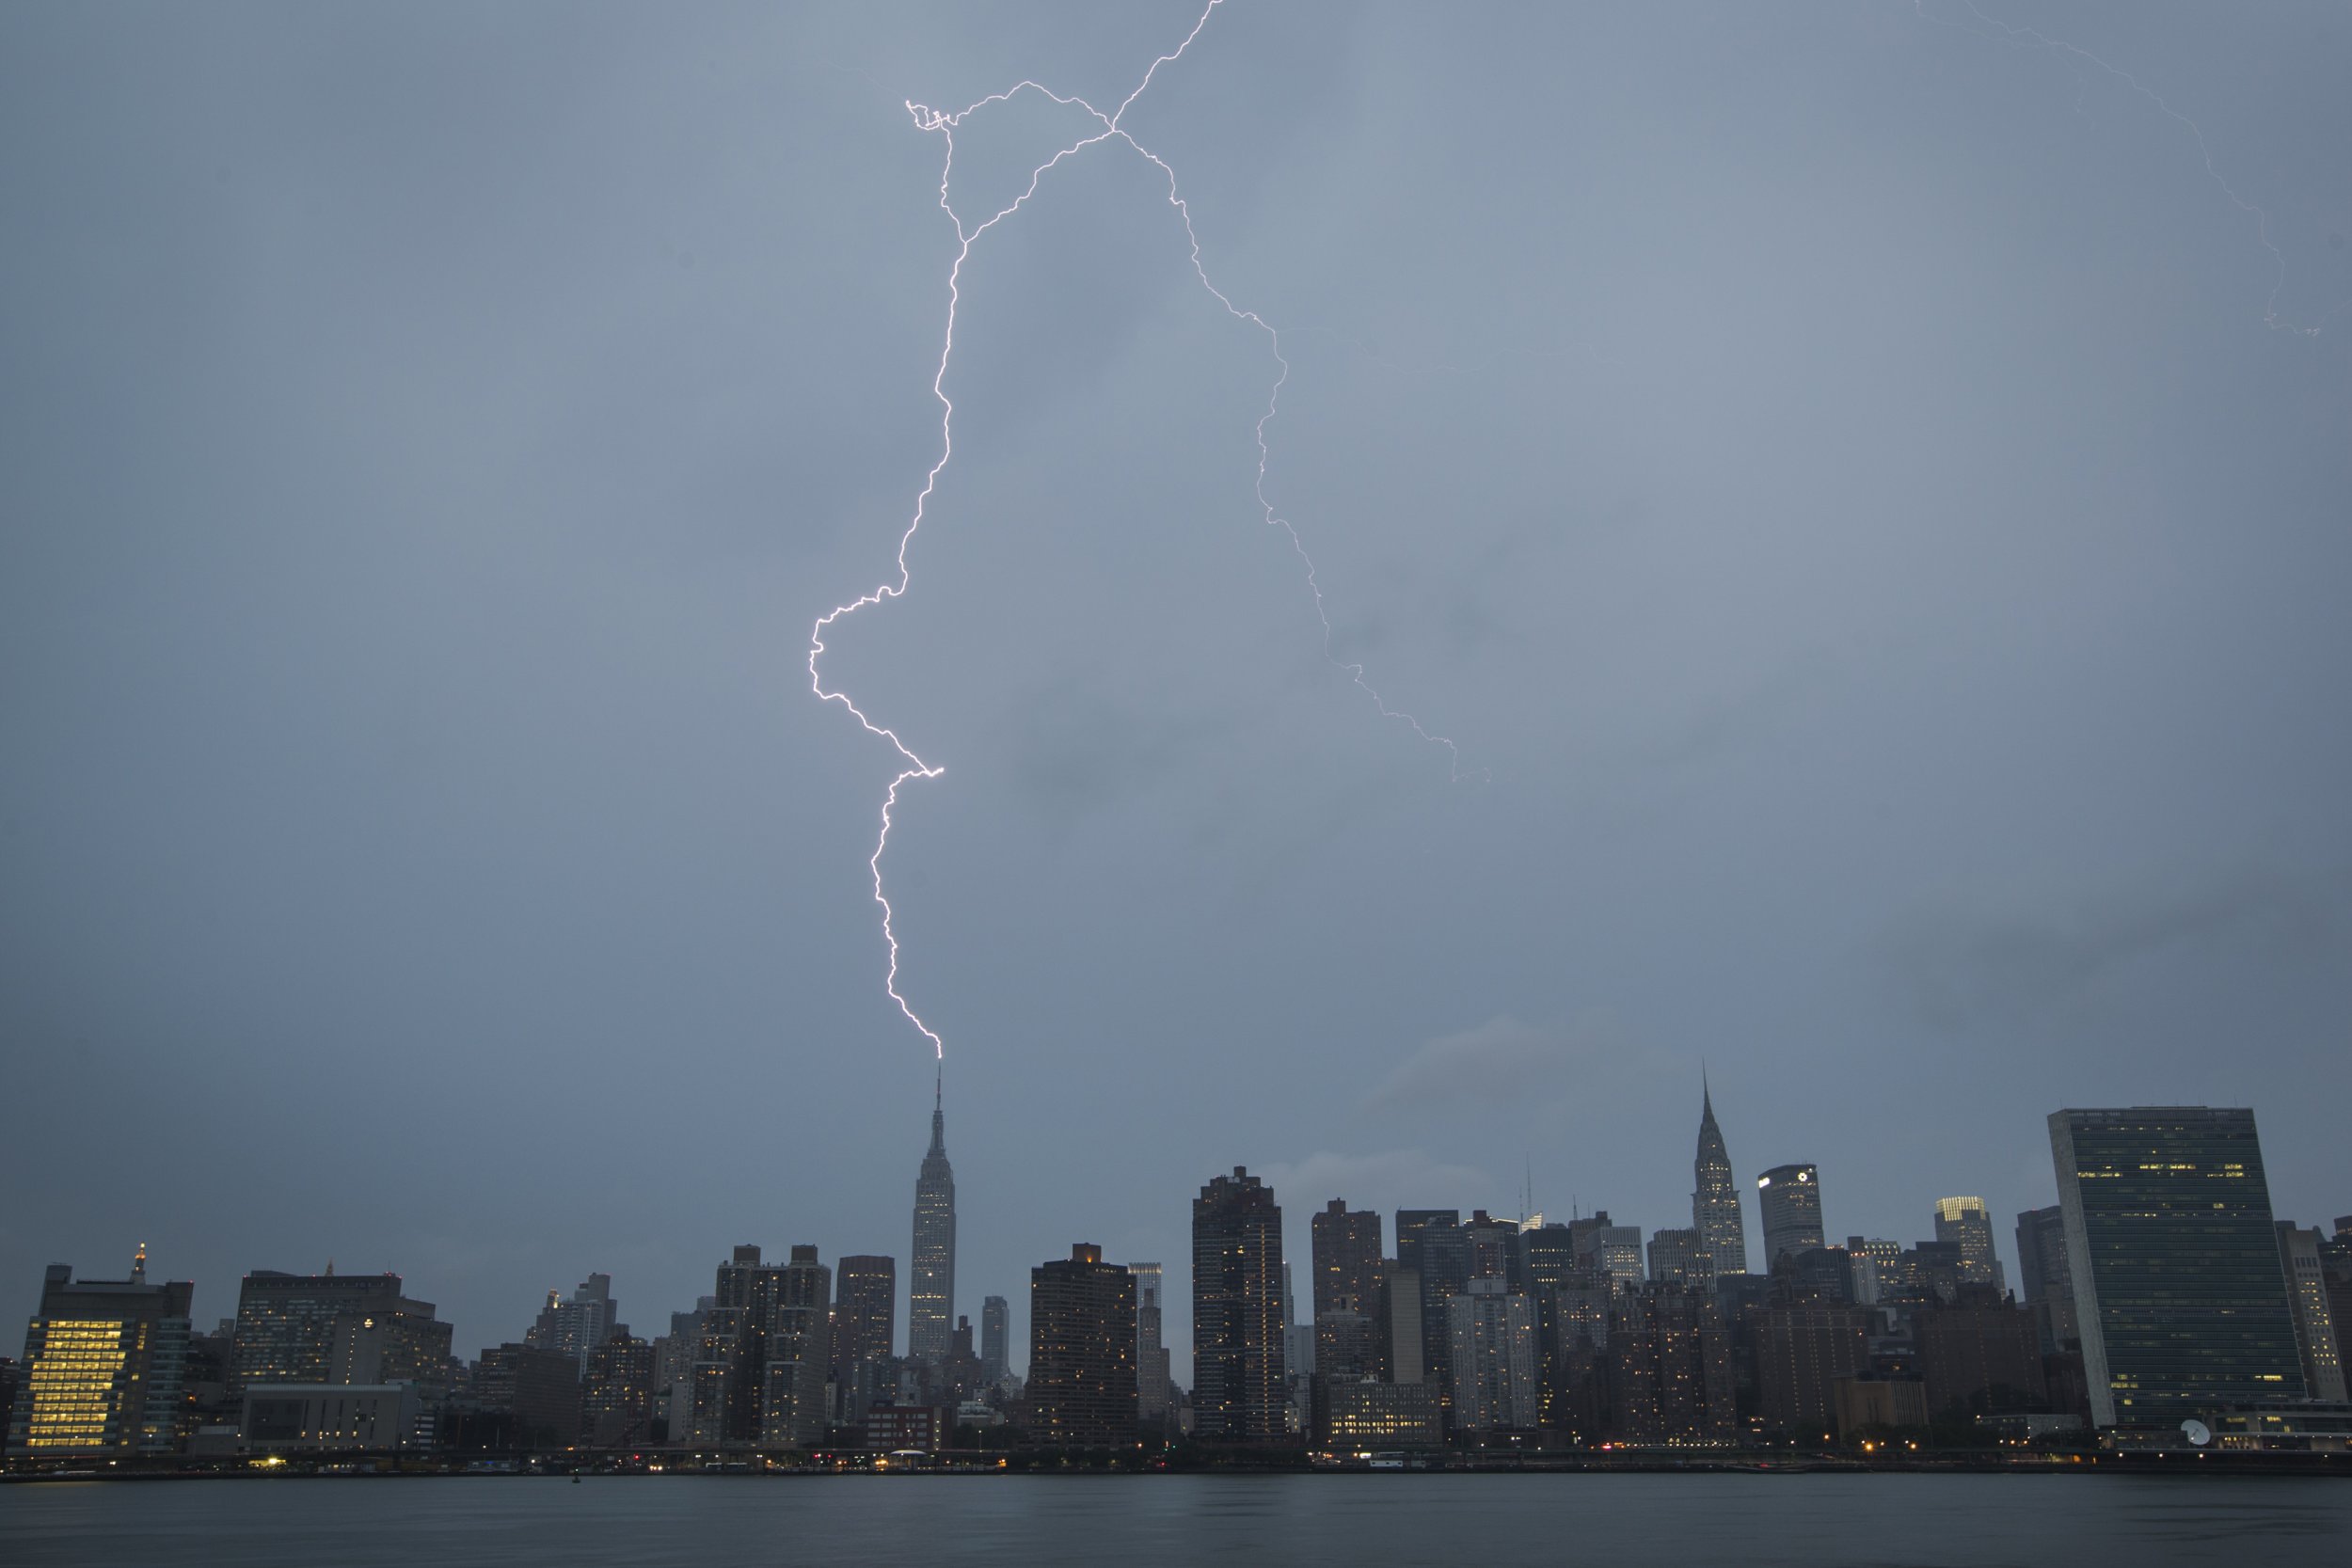 Global Warming Could Yield 50 Percent More Lightning Strikes by 2100